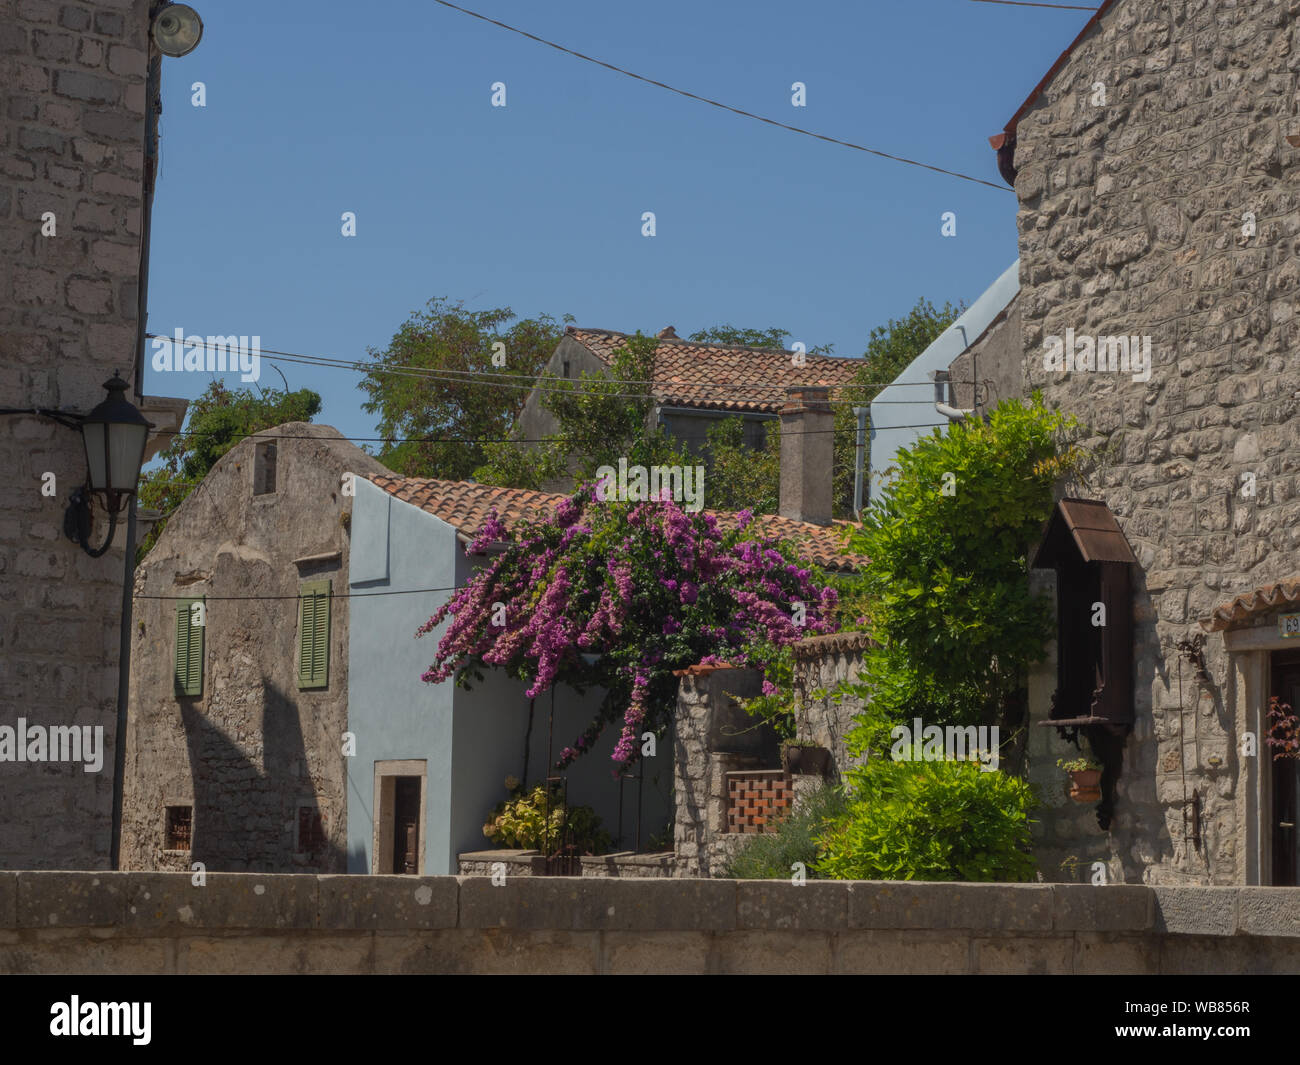 Alley of osor on the island Cres in Croatia Stock Photo